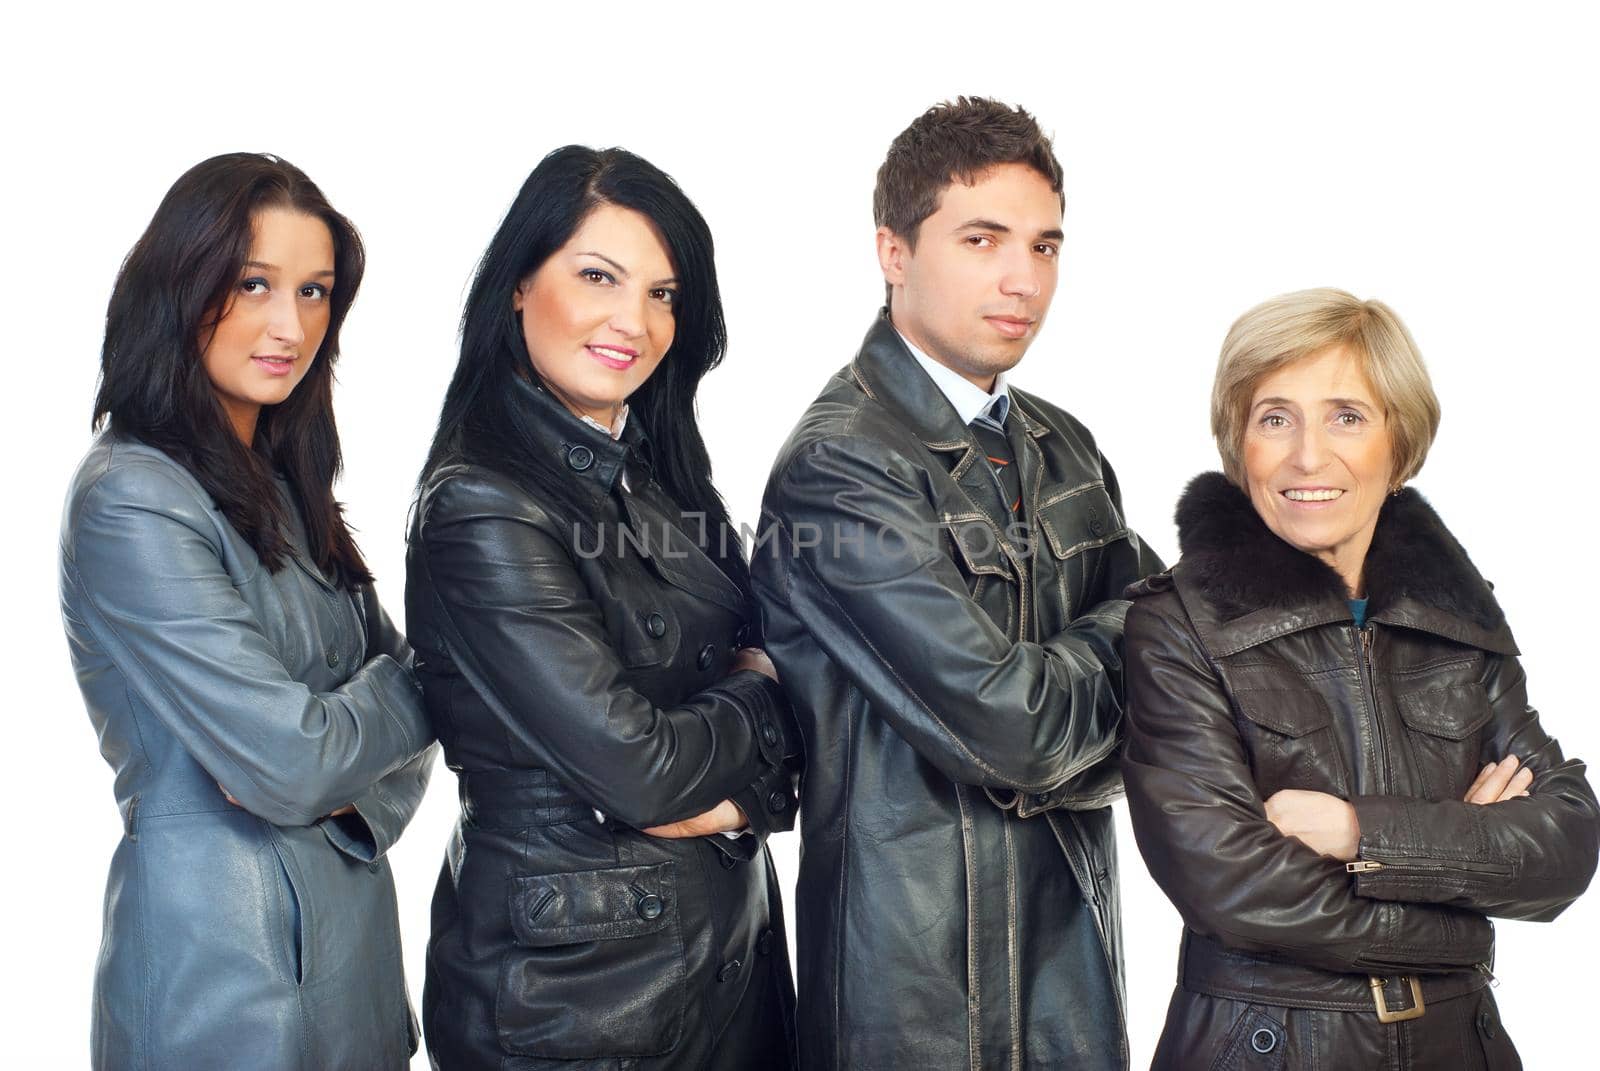 Four people  wearing differrent  leather jackets colors and models and standing  in a line in semi profile  with hands crossed  isolated on white background